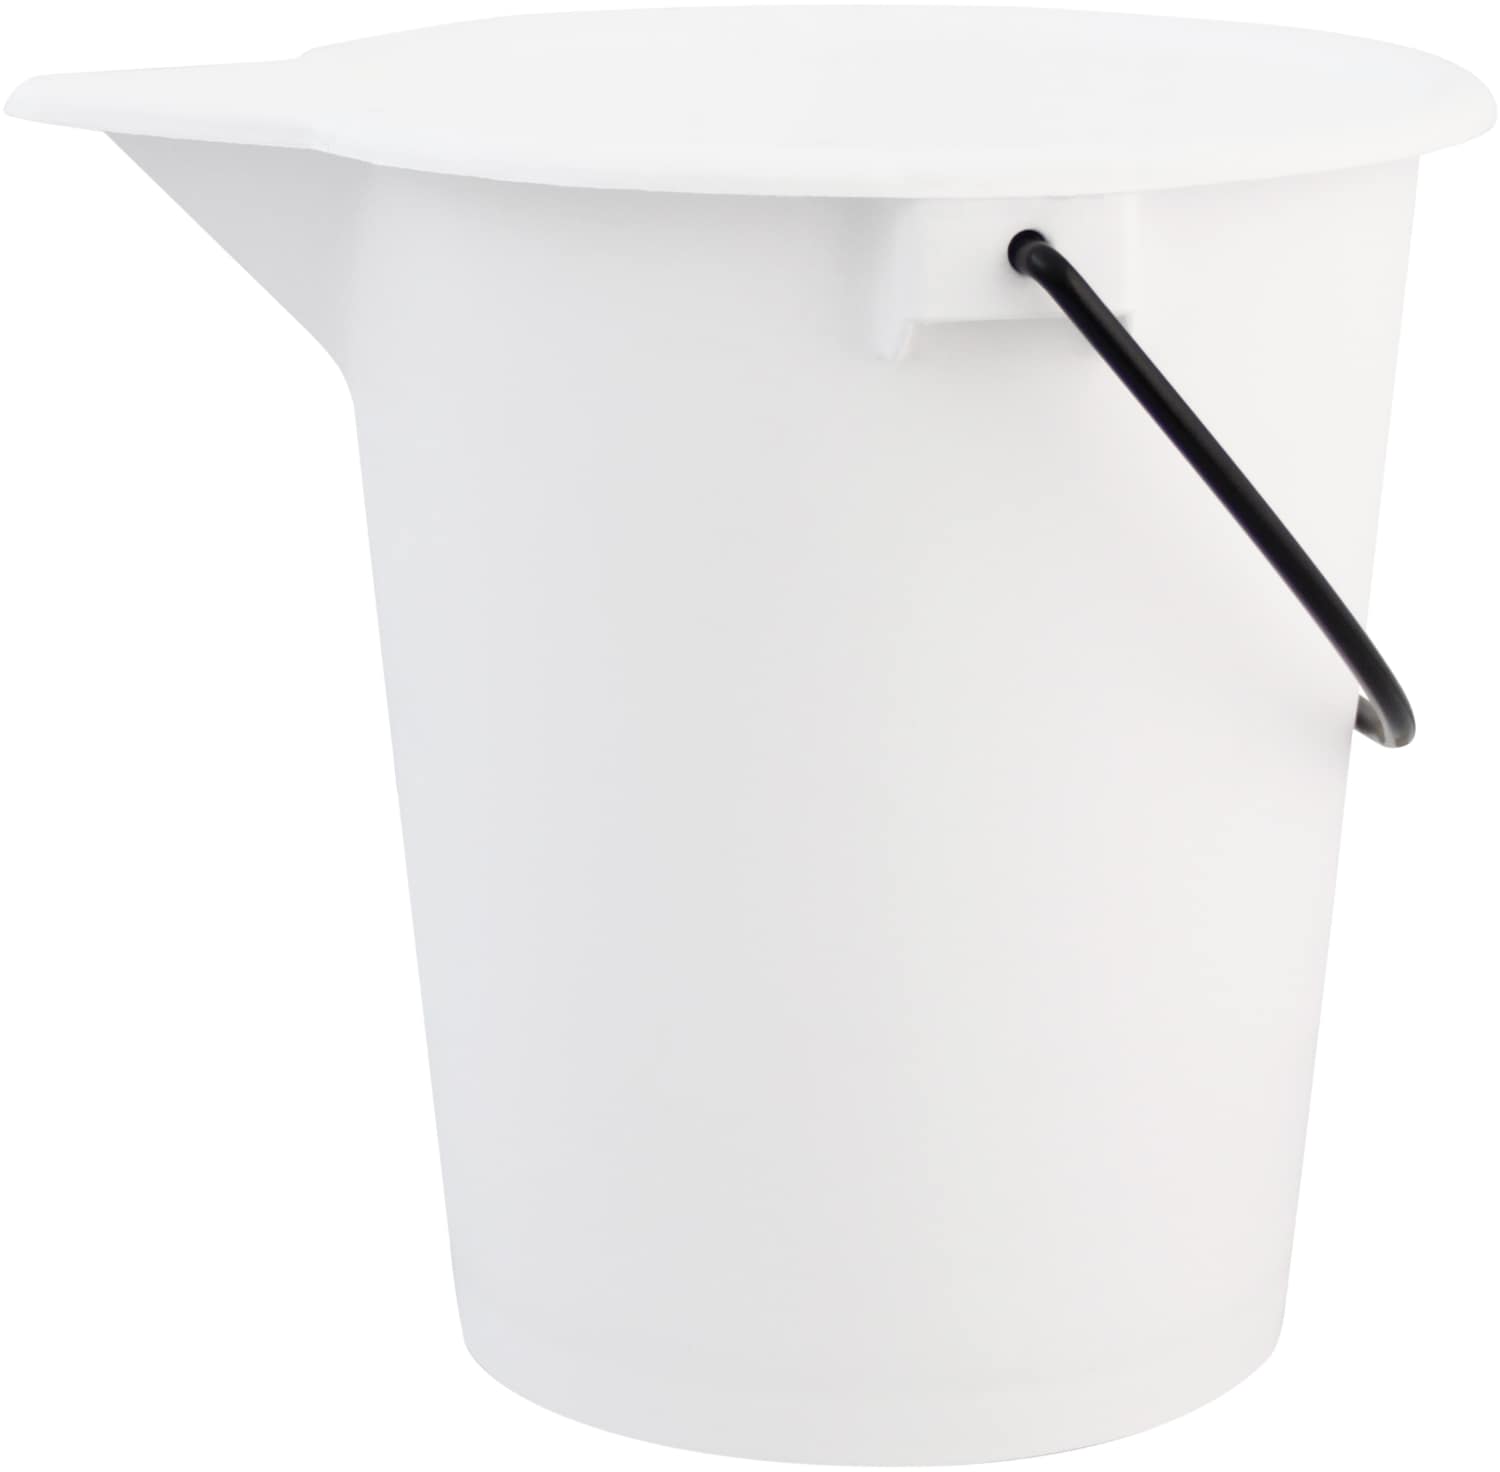 Bucket with spout and metal handle - heavy duty quality 200830